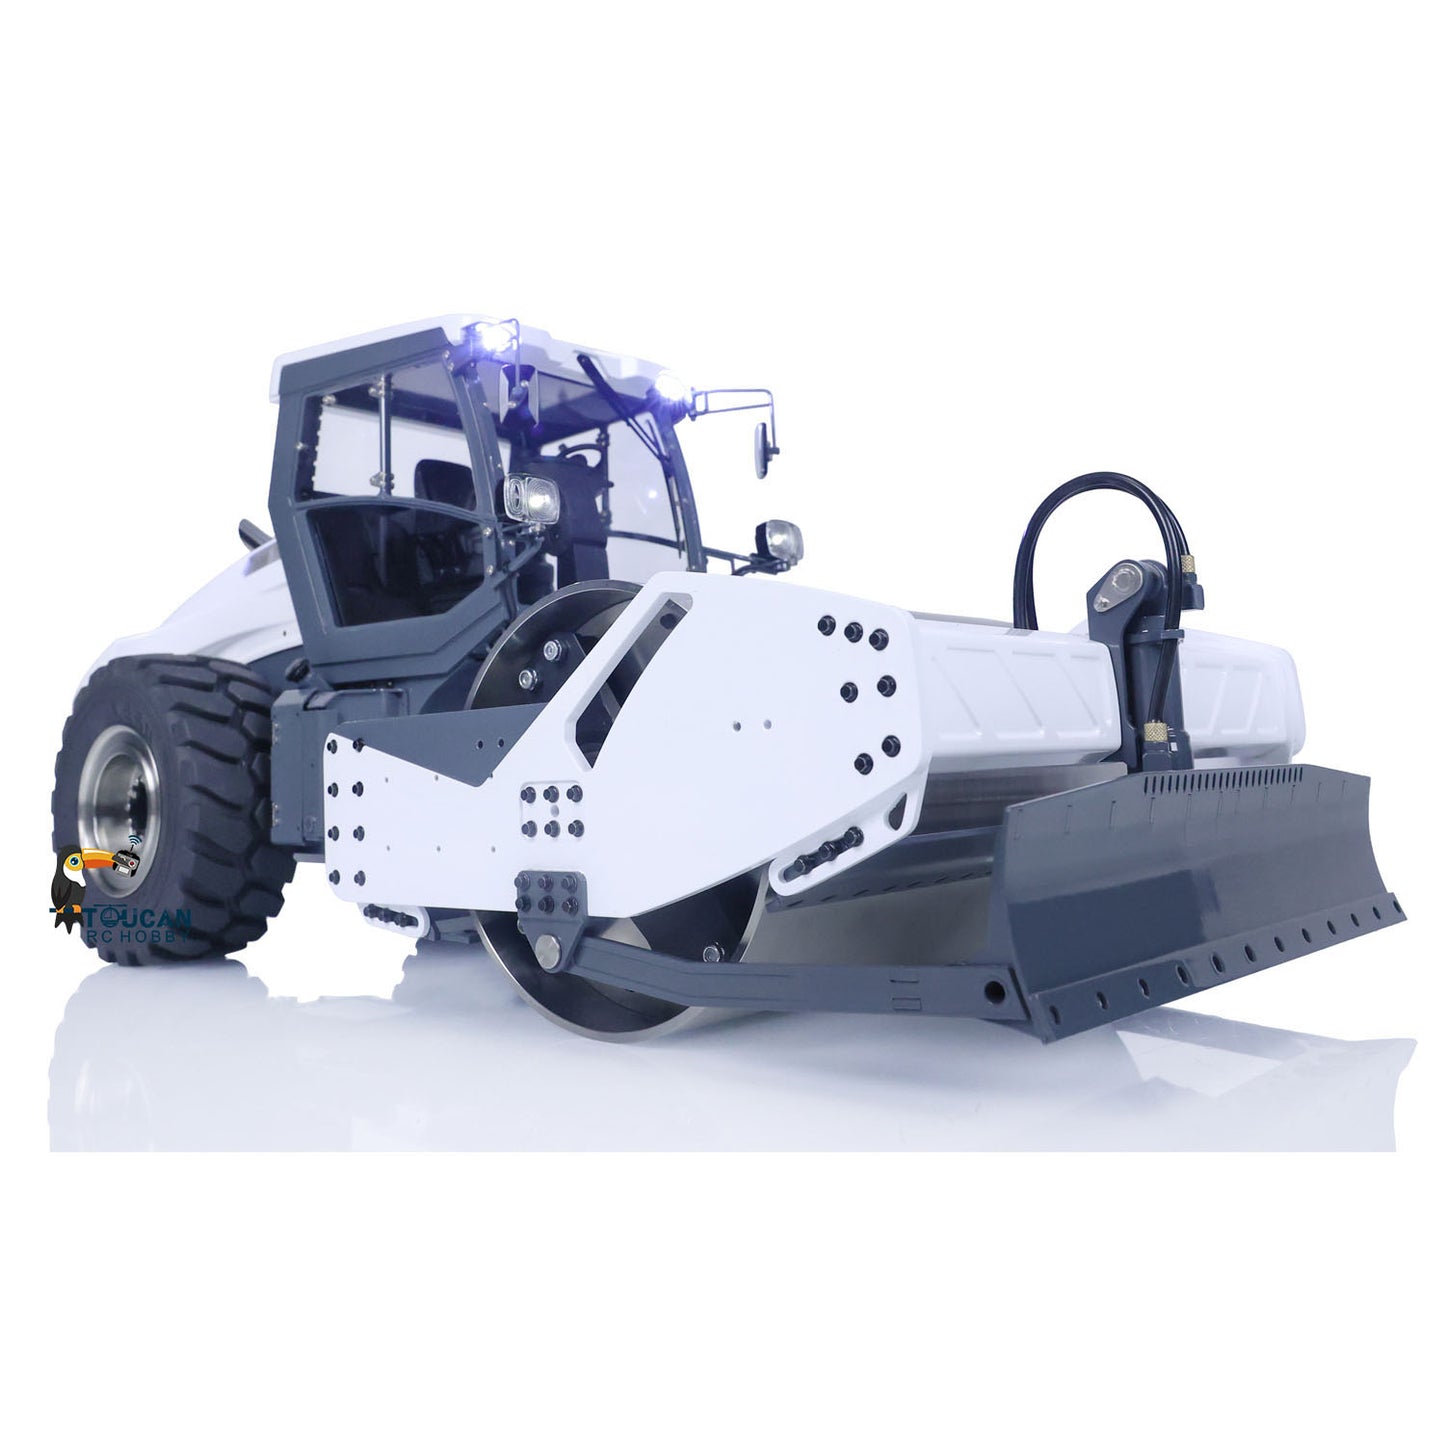 LESU 1/14 Hydraulic RC White Road Roller Aoue-H13i Electric Assembled Engineering Metal Vehicle Sound Light System ESC Motor